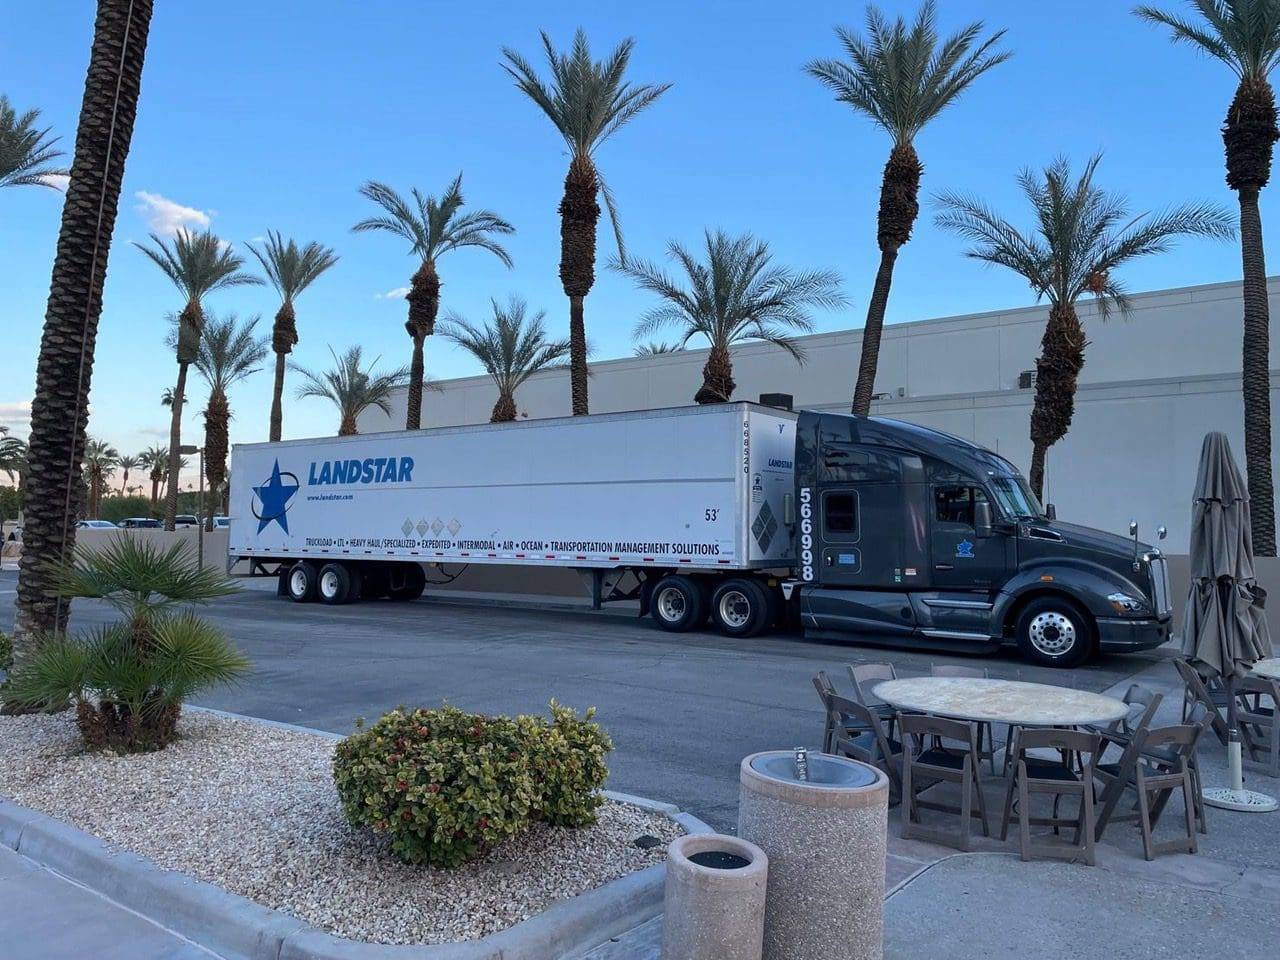 Landstar Truck with palm trees